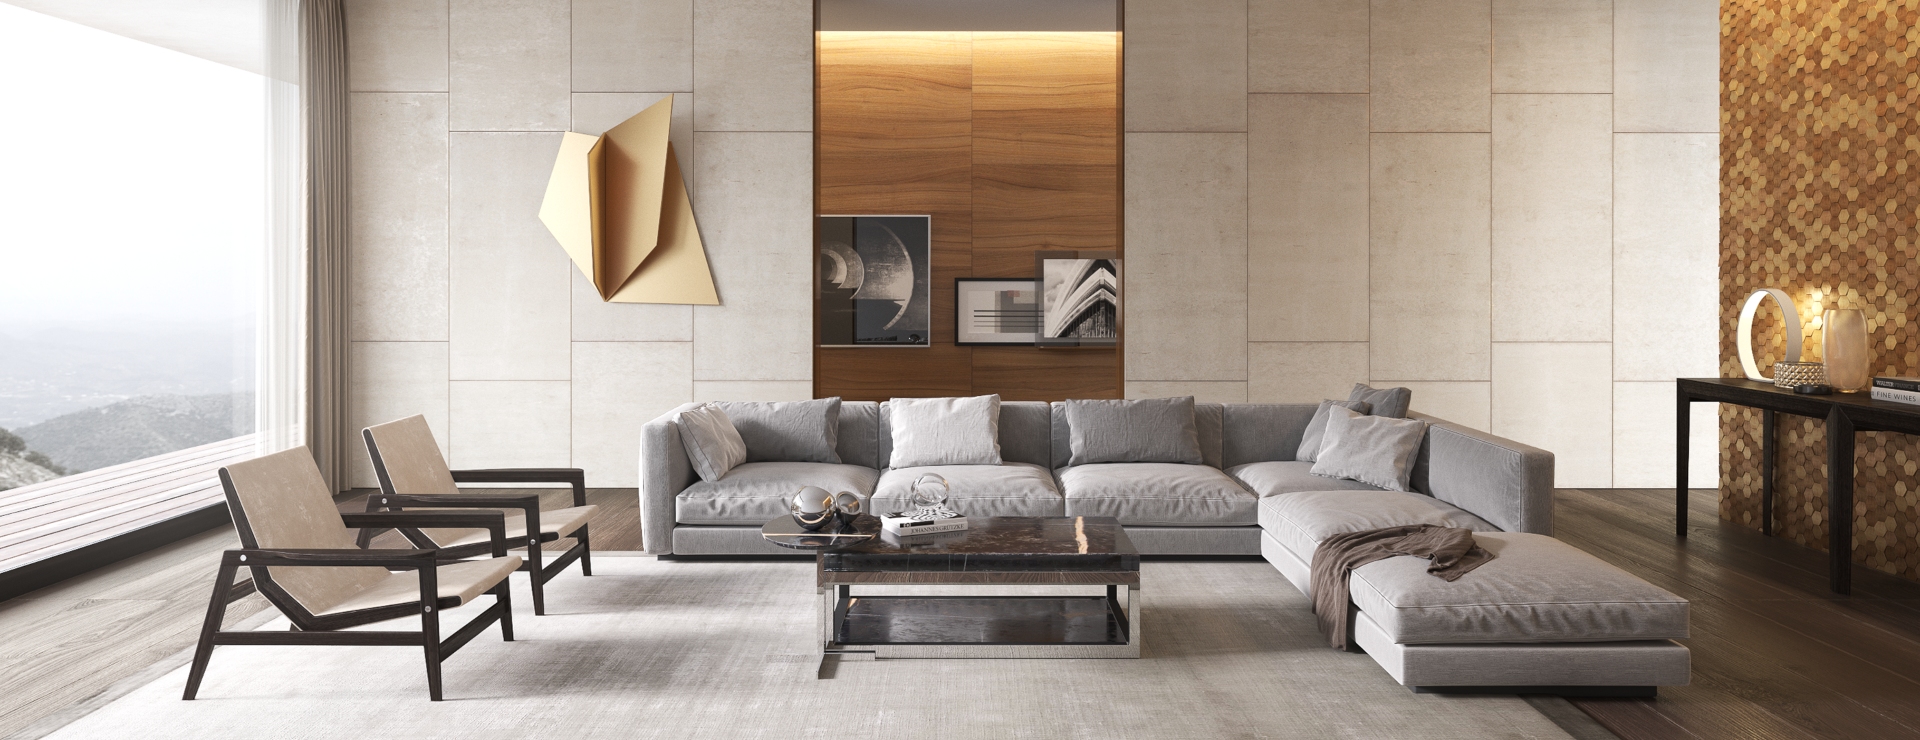 Luxury Living Rooms And Tips You Need To Know Part Ii